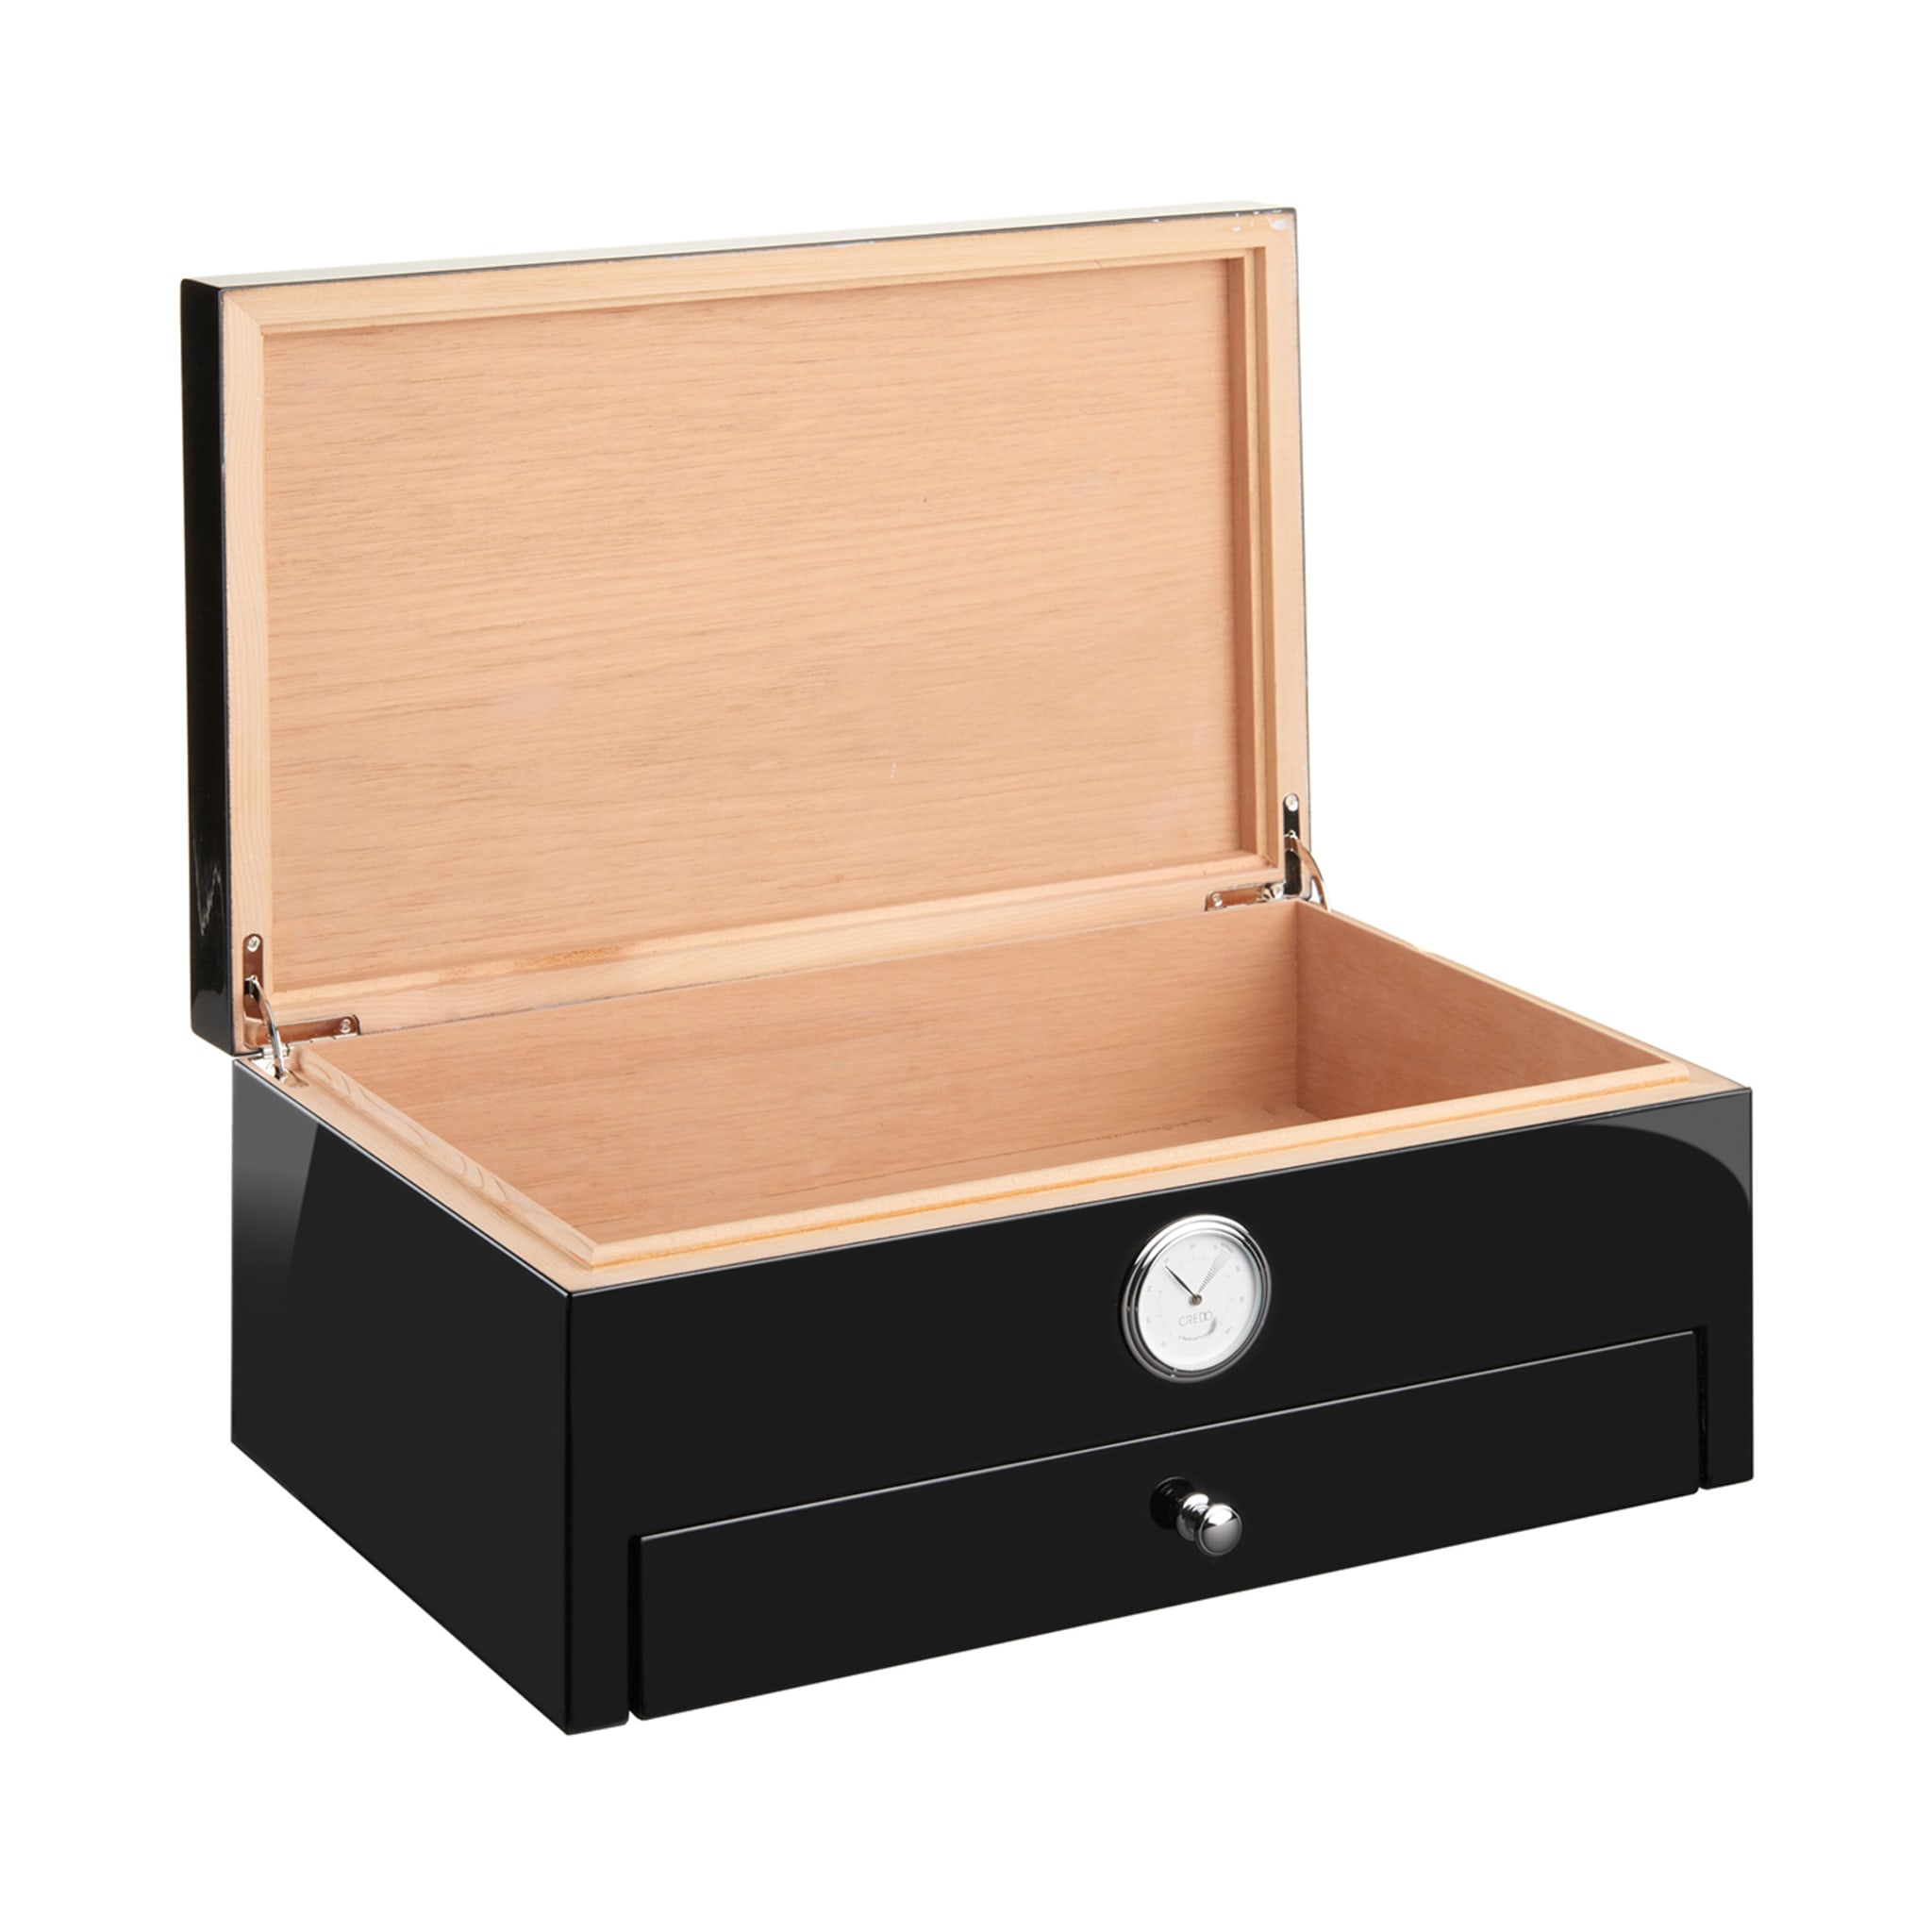 Full Color Black Humidor (Special Club Edition) - Alternative view 1